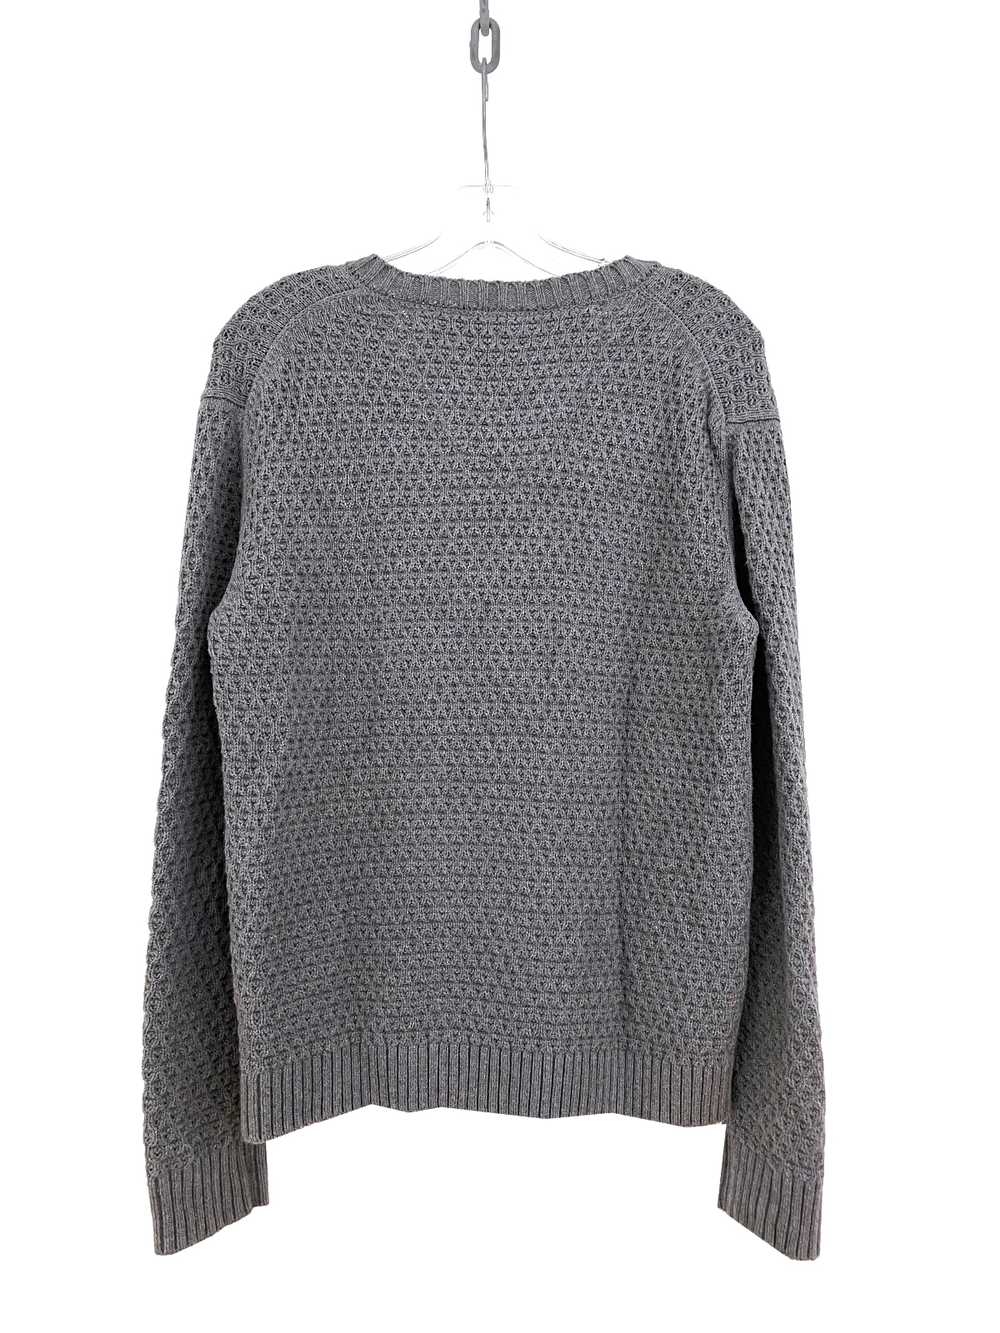 UNDERCOVER SS13 Heaven Talking Heads Sweater - image 6